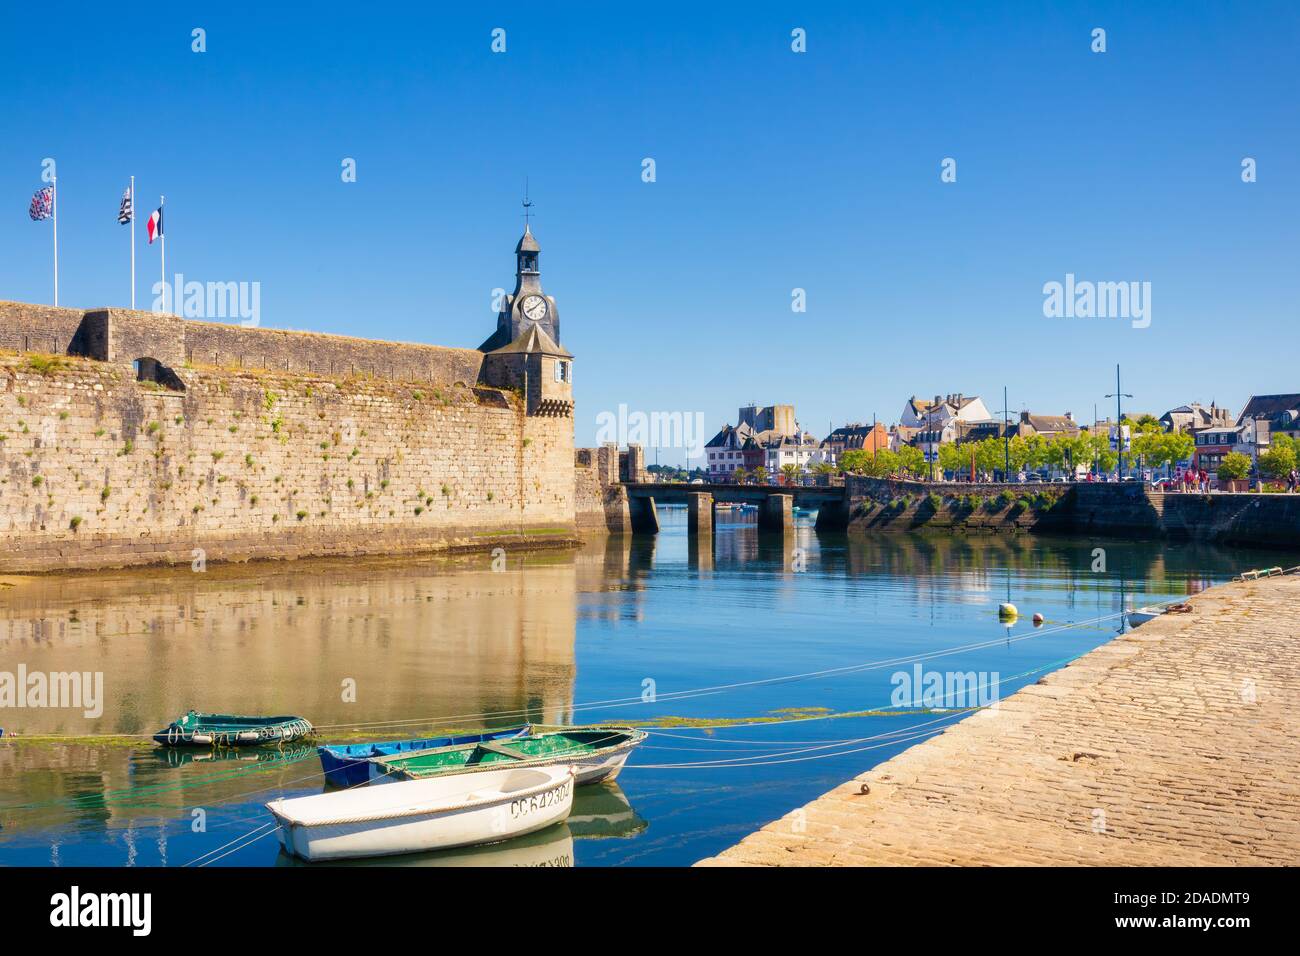 CONCARNEAU, BRITTANY, FRANCE: View of the old walled city of Concarneau, located on an island next to the port. Stock Photo